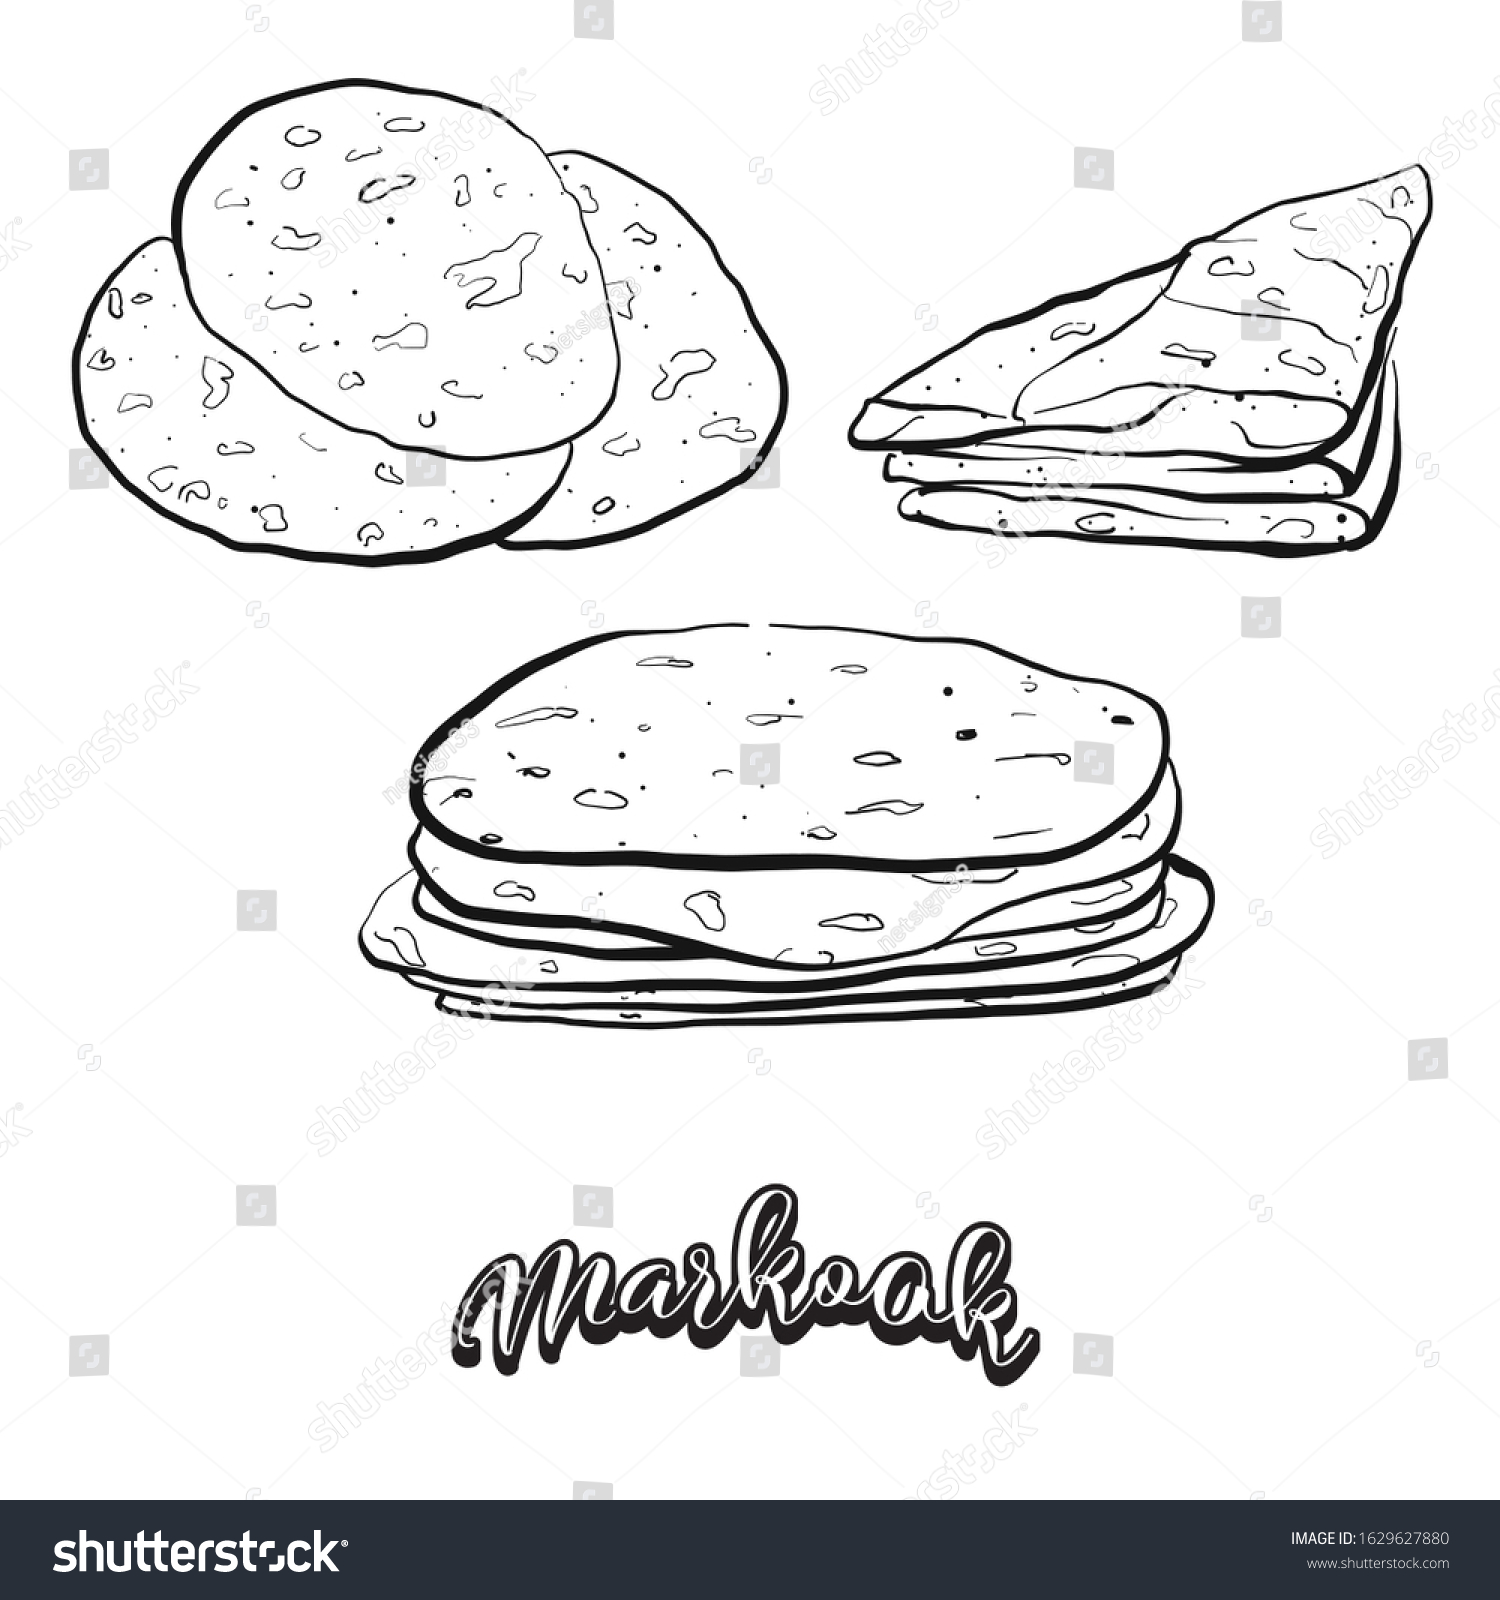 SVG of Markook food sketch separated on white. Vector drawing of Flatbread, Saj bread, usually known in Levant. Food illustration series. svg